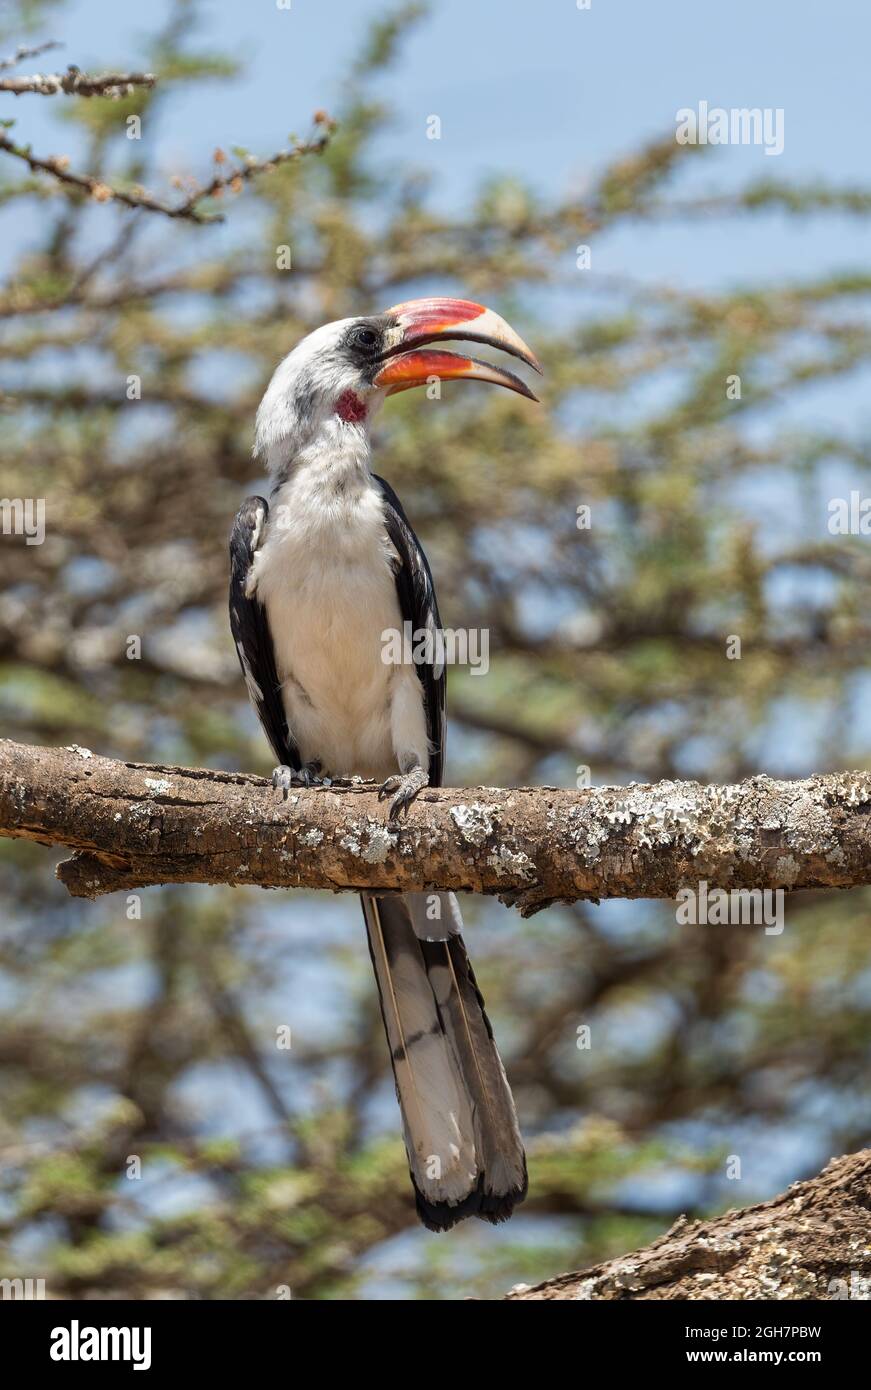 Von Der Decken's Hornbill - Tockus deckeni, beautiful colored hornbill from East African forests and woodlands, Ethiopia. Stock Photo